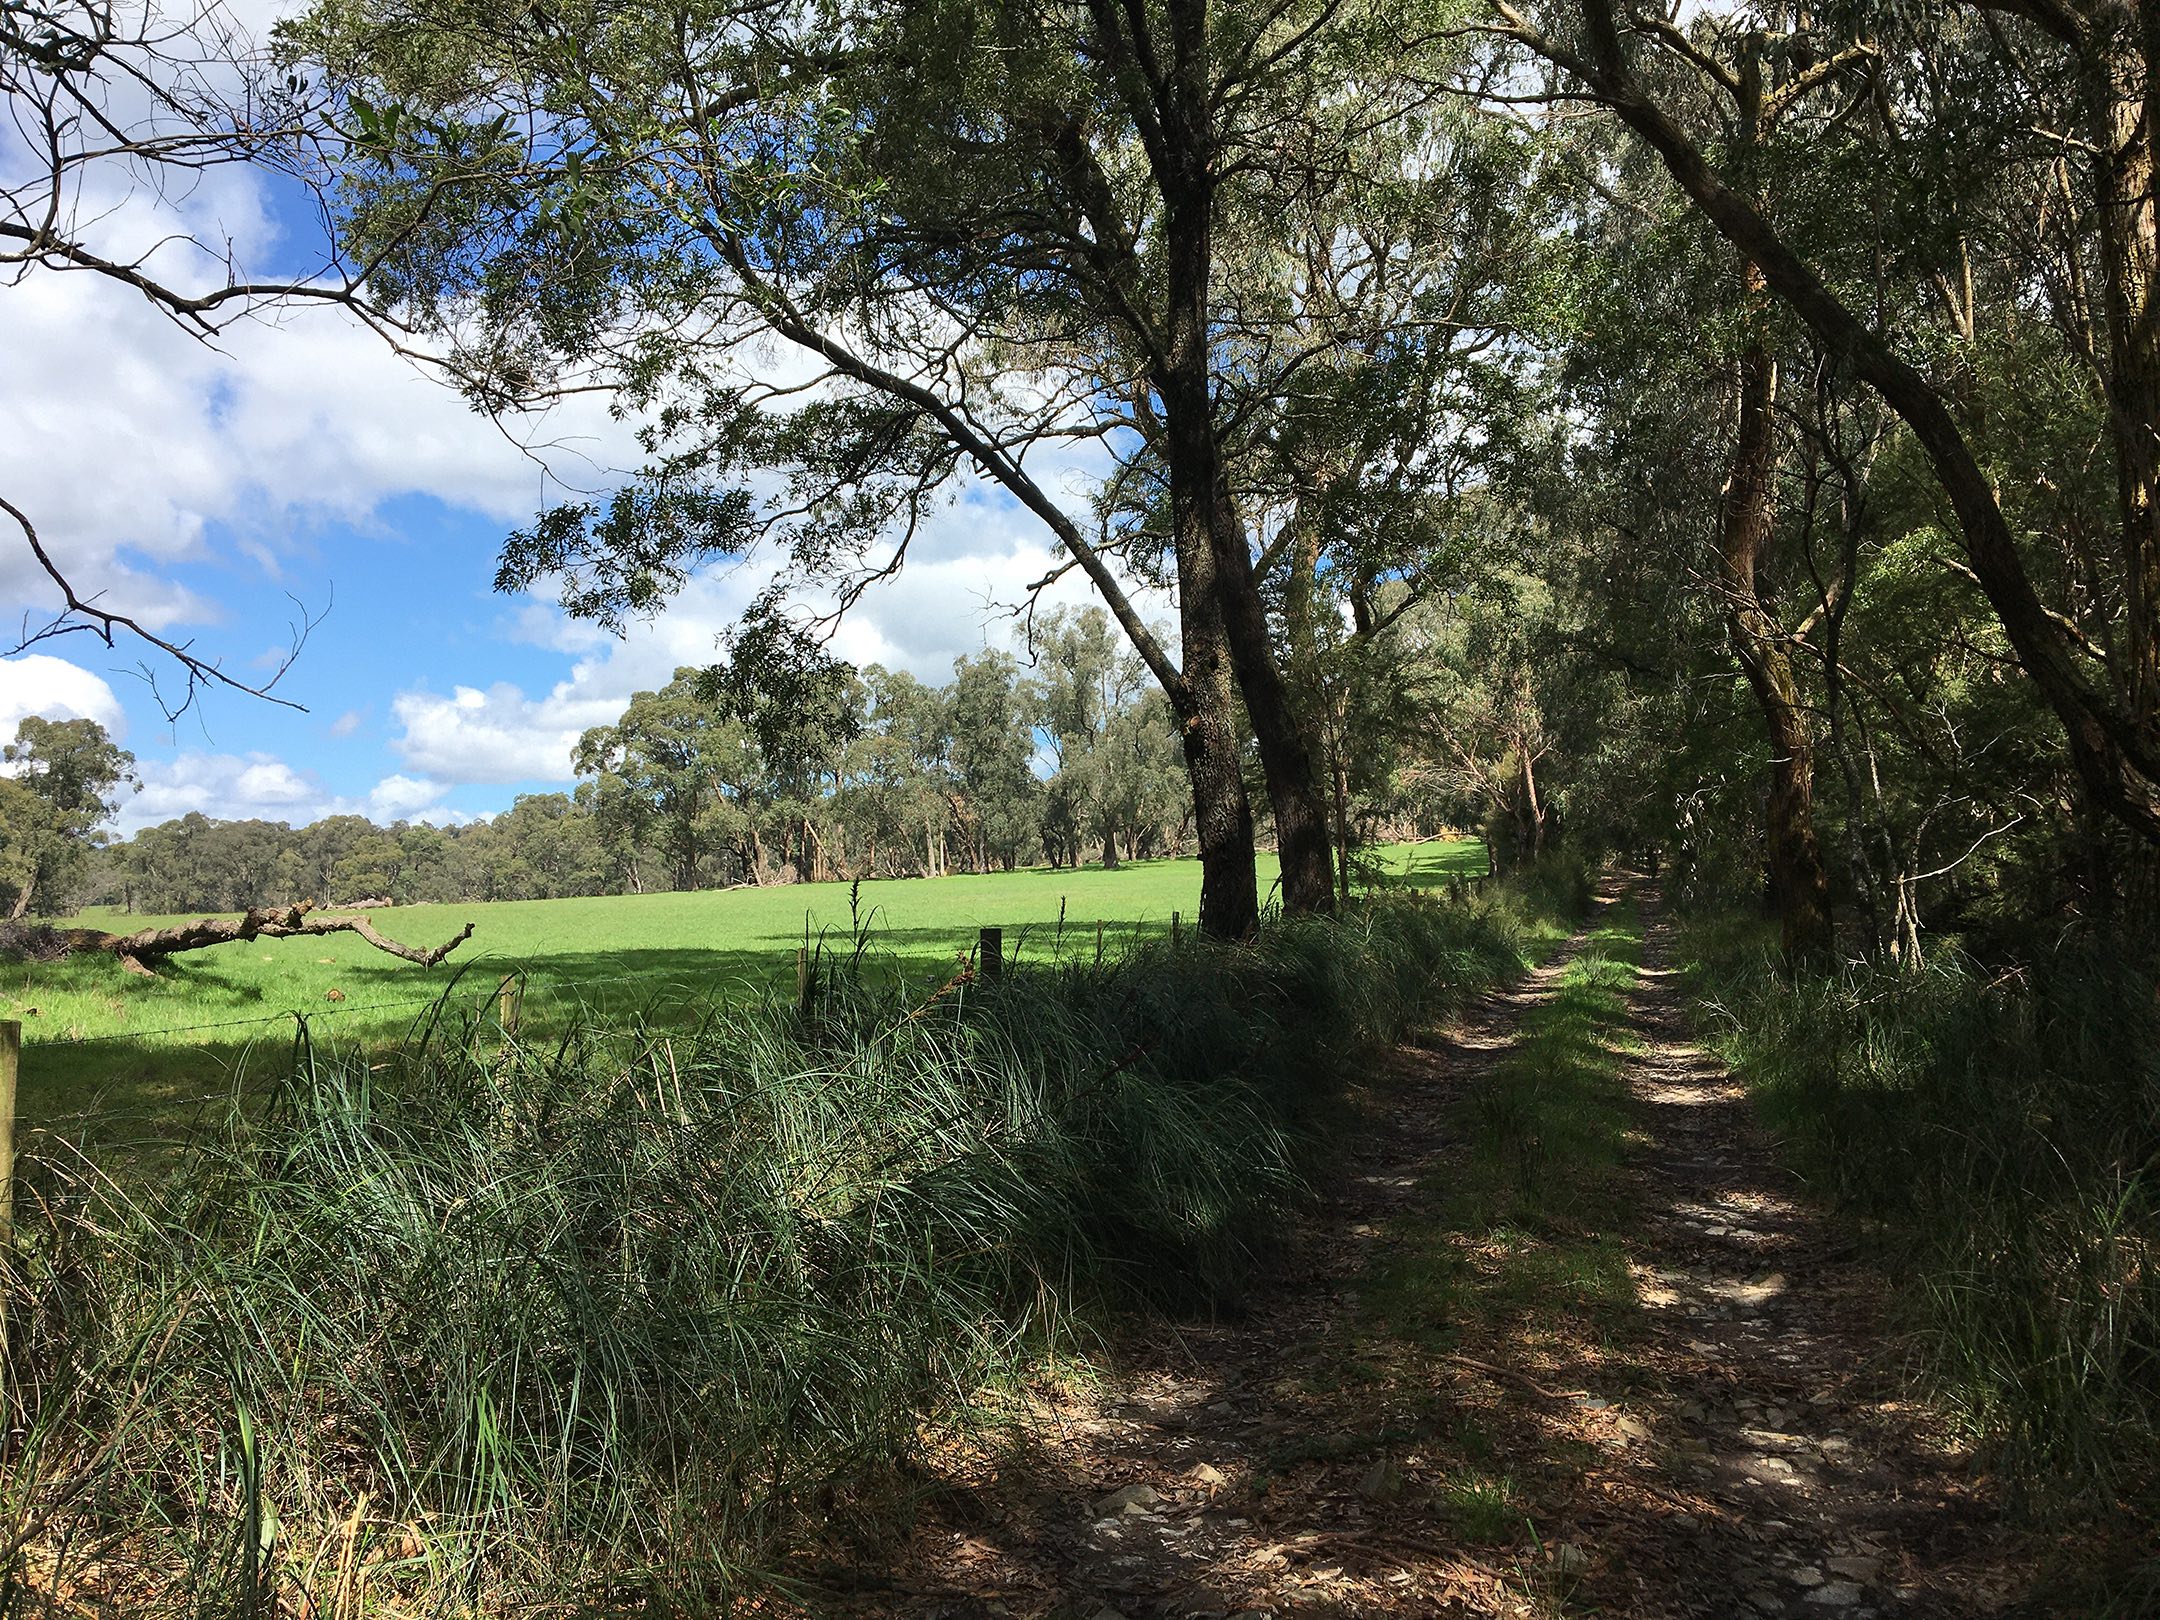 Yellingbo Nature Conservation Reserve and bordering farmland in Upwey, Victoria, Australia, photo by Madelynne Cornish